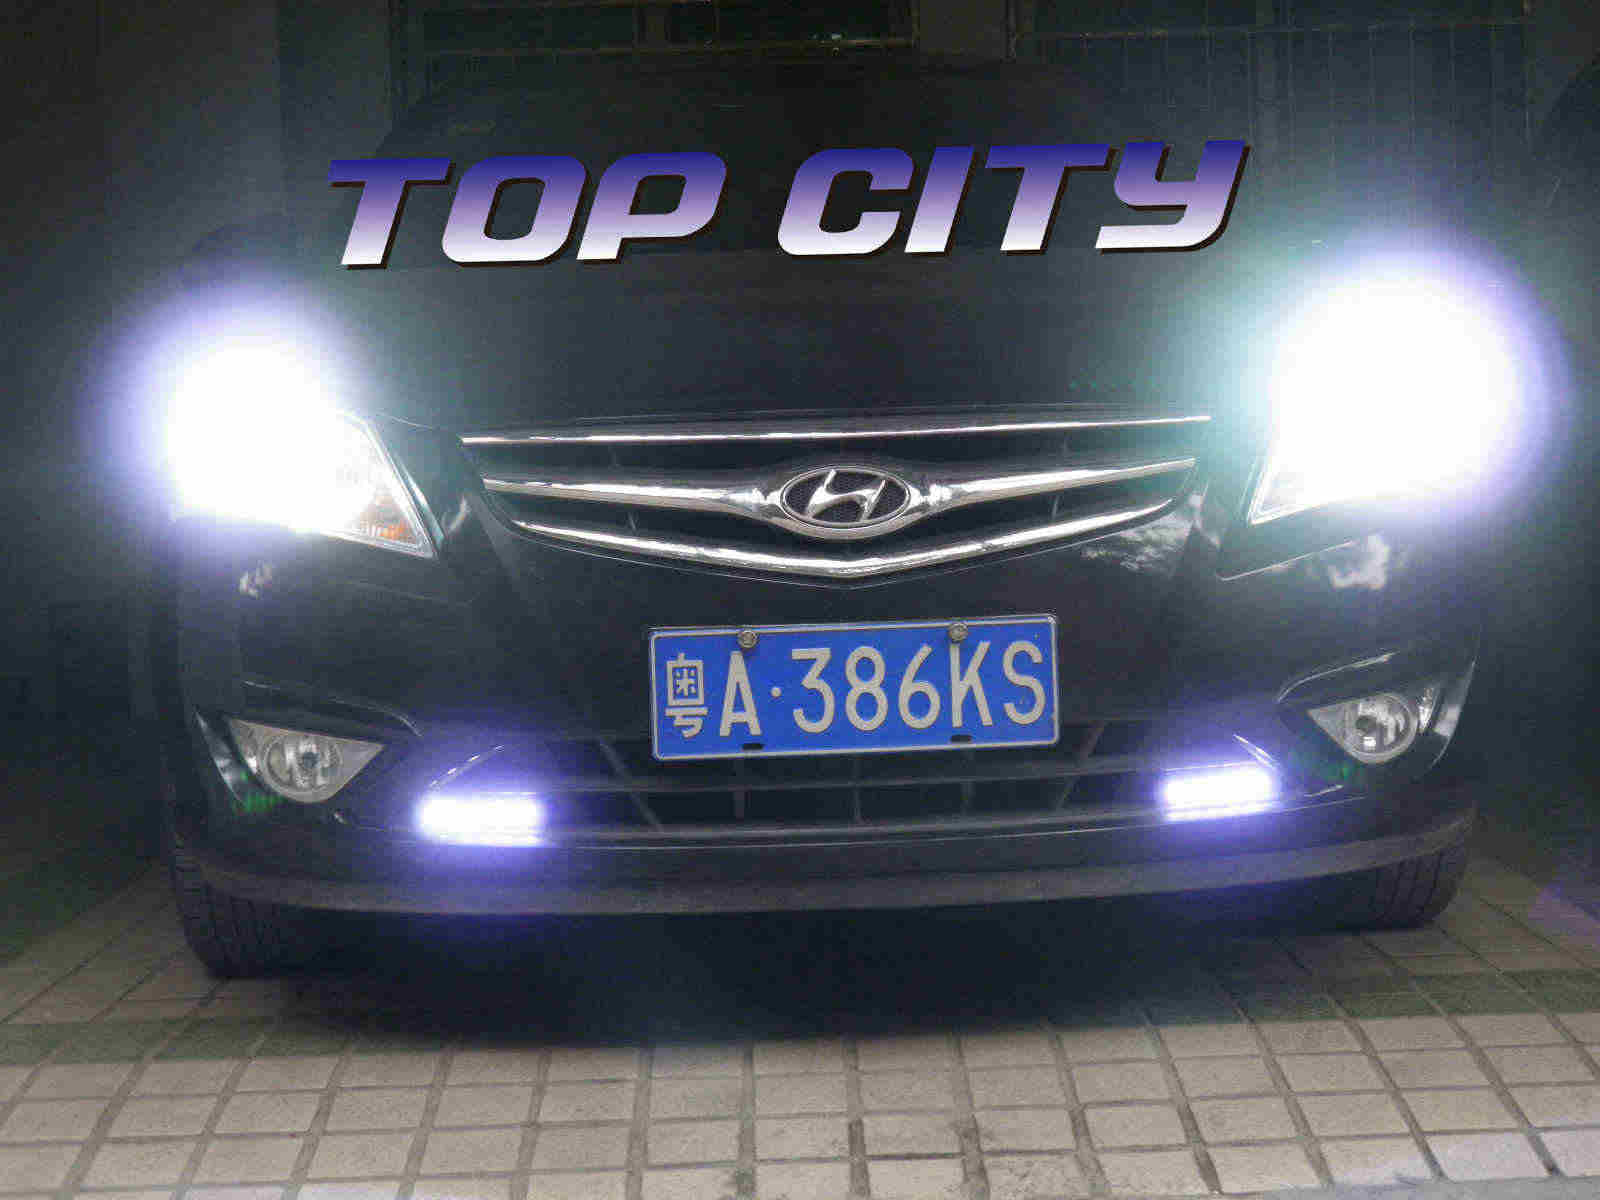 Topcity car led, auto led manufacturer hid and DRL Lighting photo